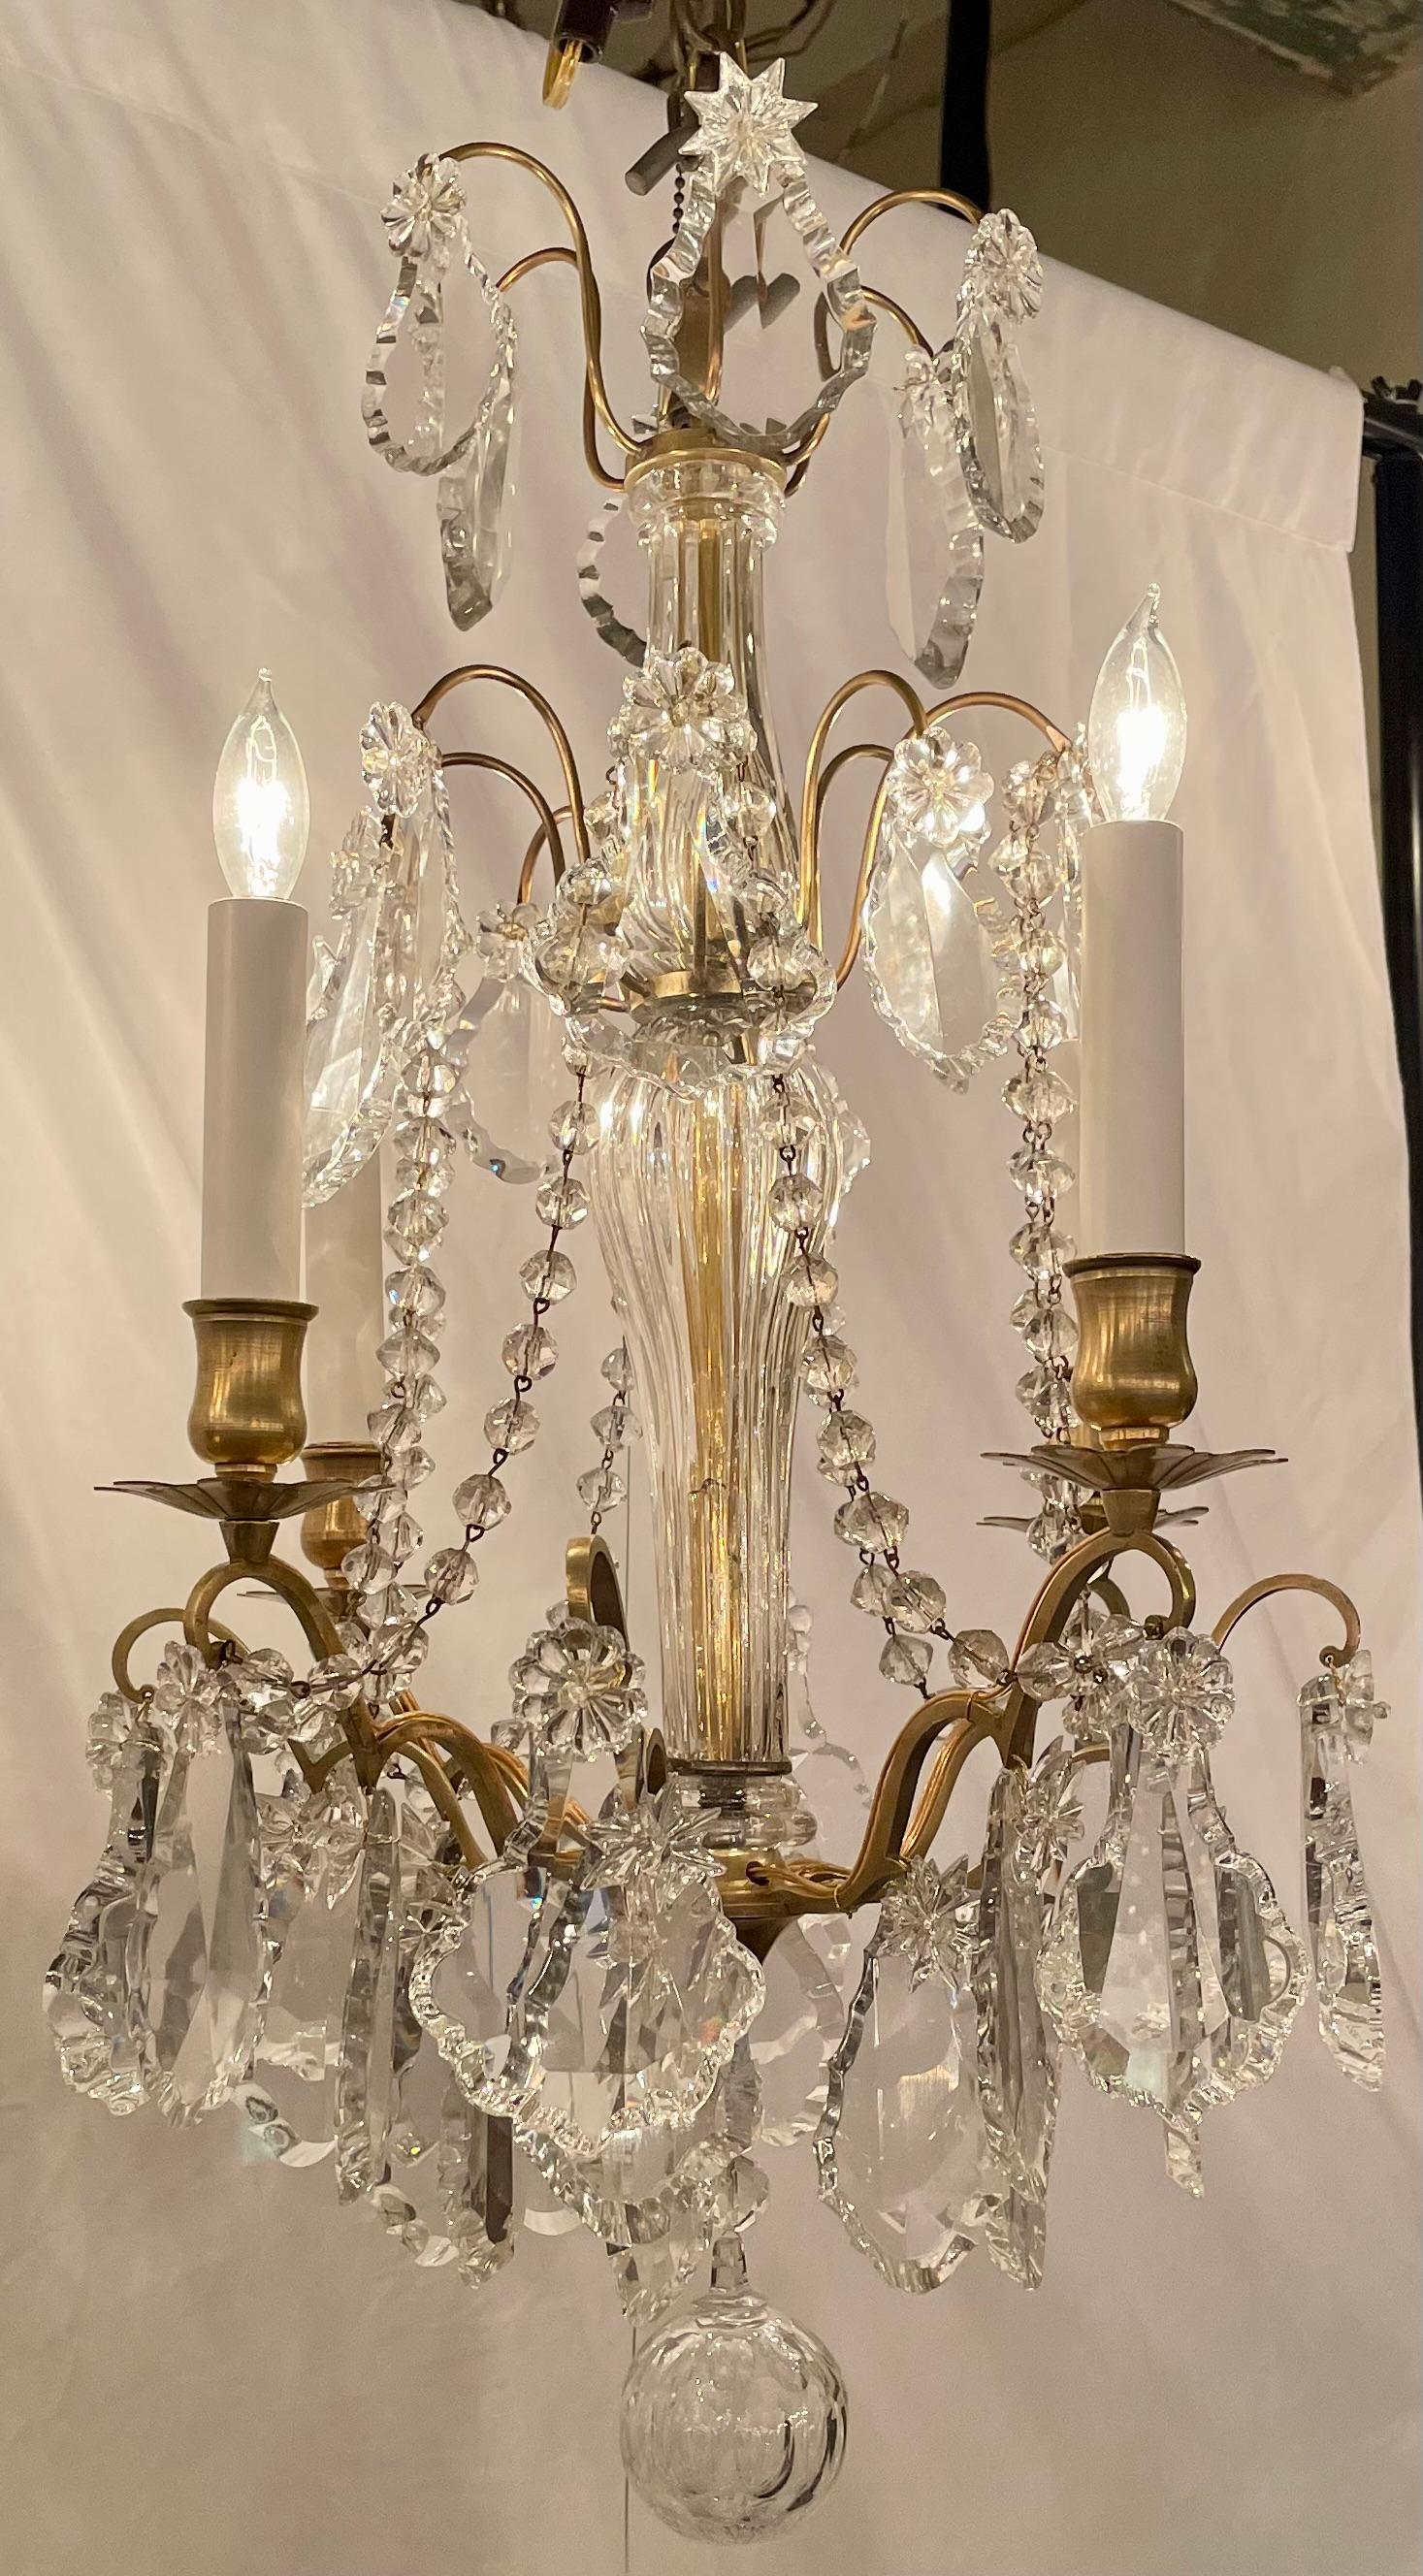 Antique French Baccarat Crystal & Gold Bronze 4 Light Chandelier, Circa 1890-1900.